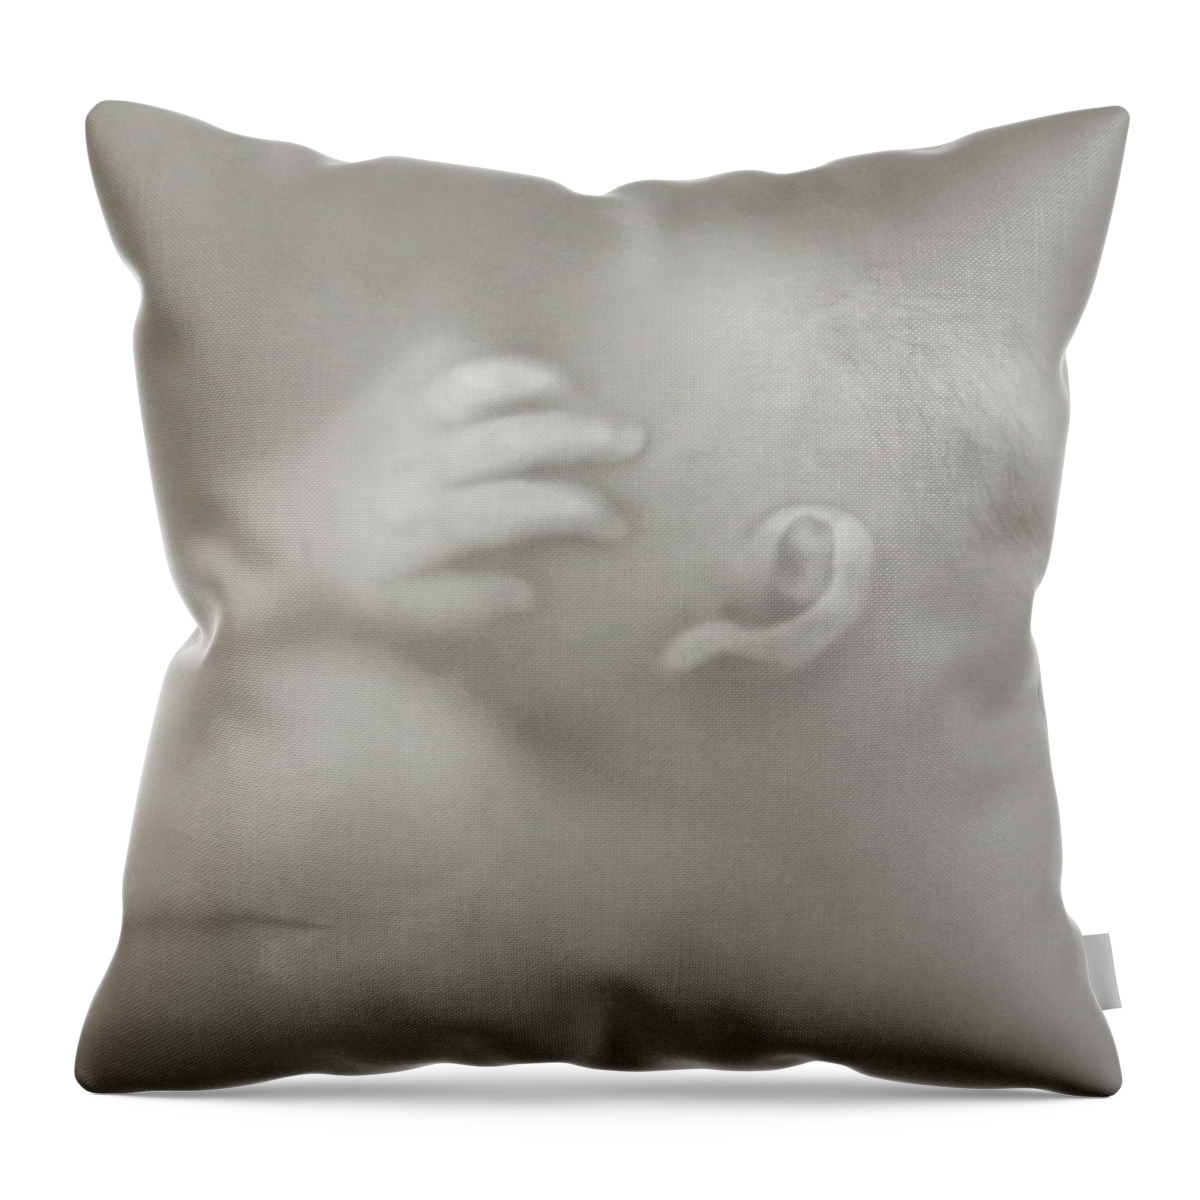 Black & White Throw Pillow featuring the photograph Latex Series, Brooke, 3 weeks old by Anne Geddes